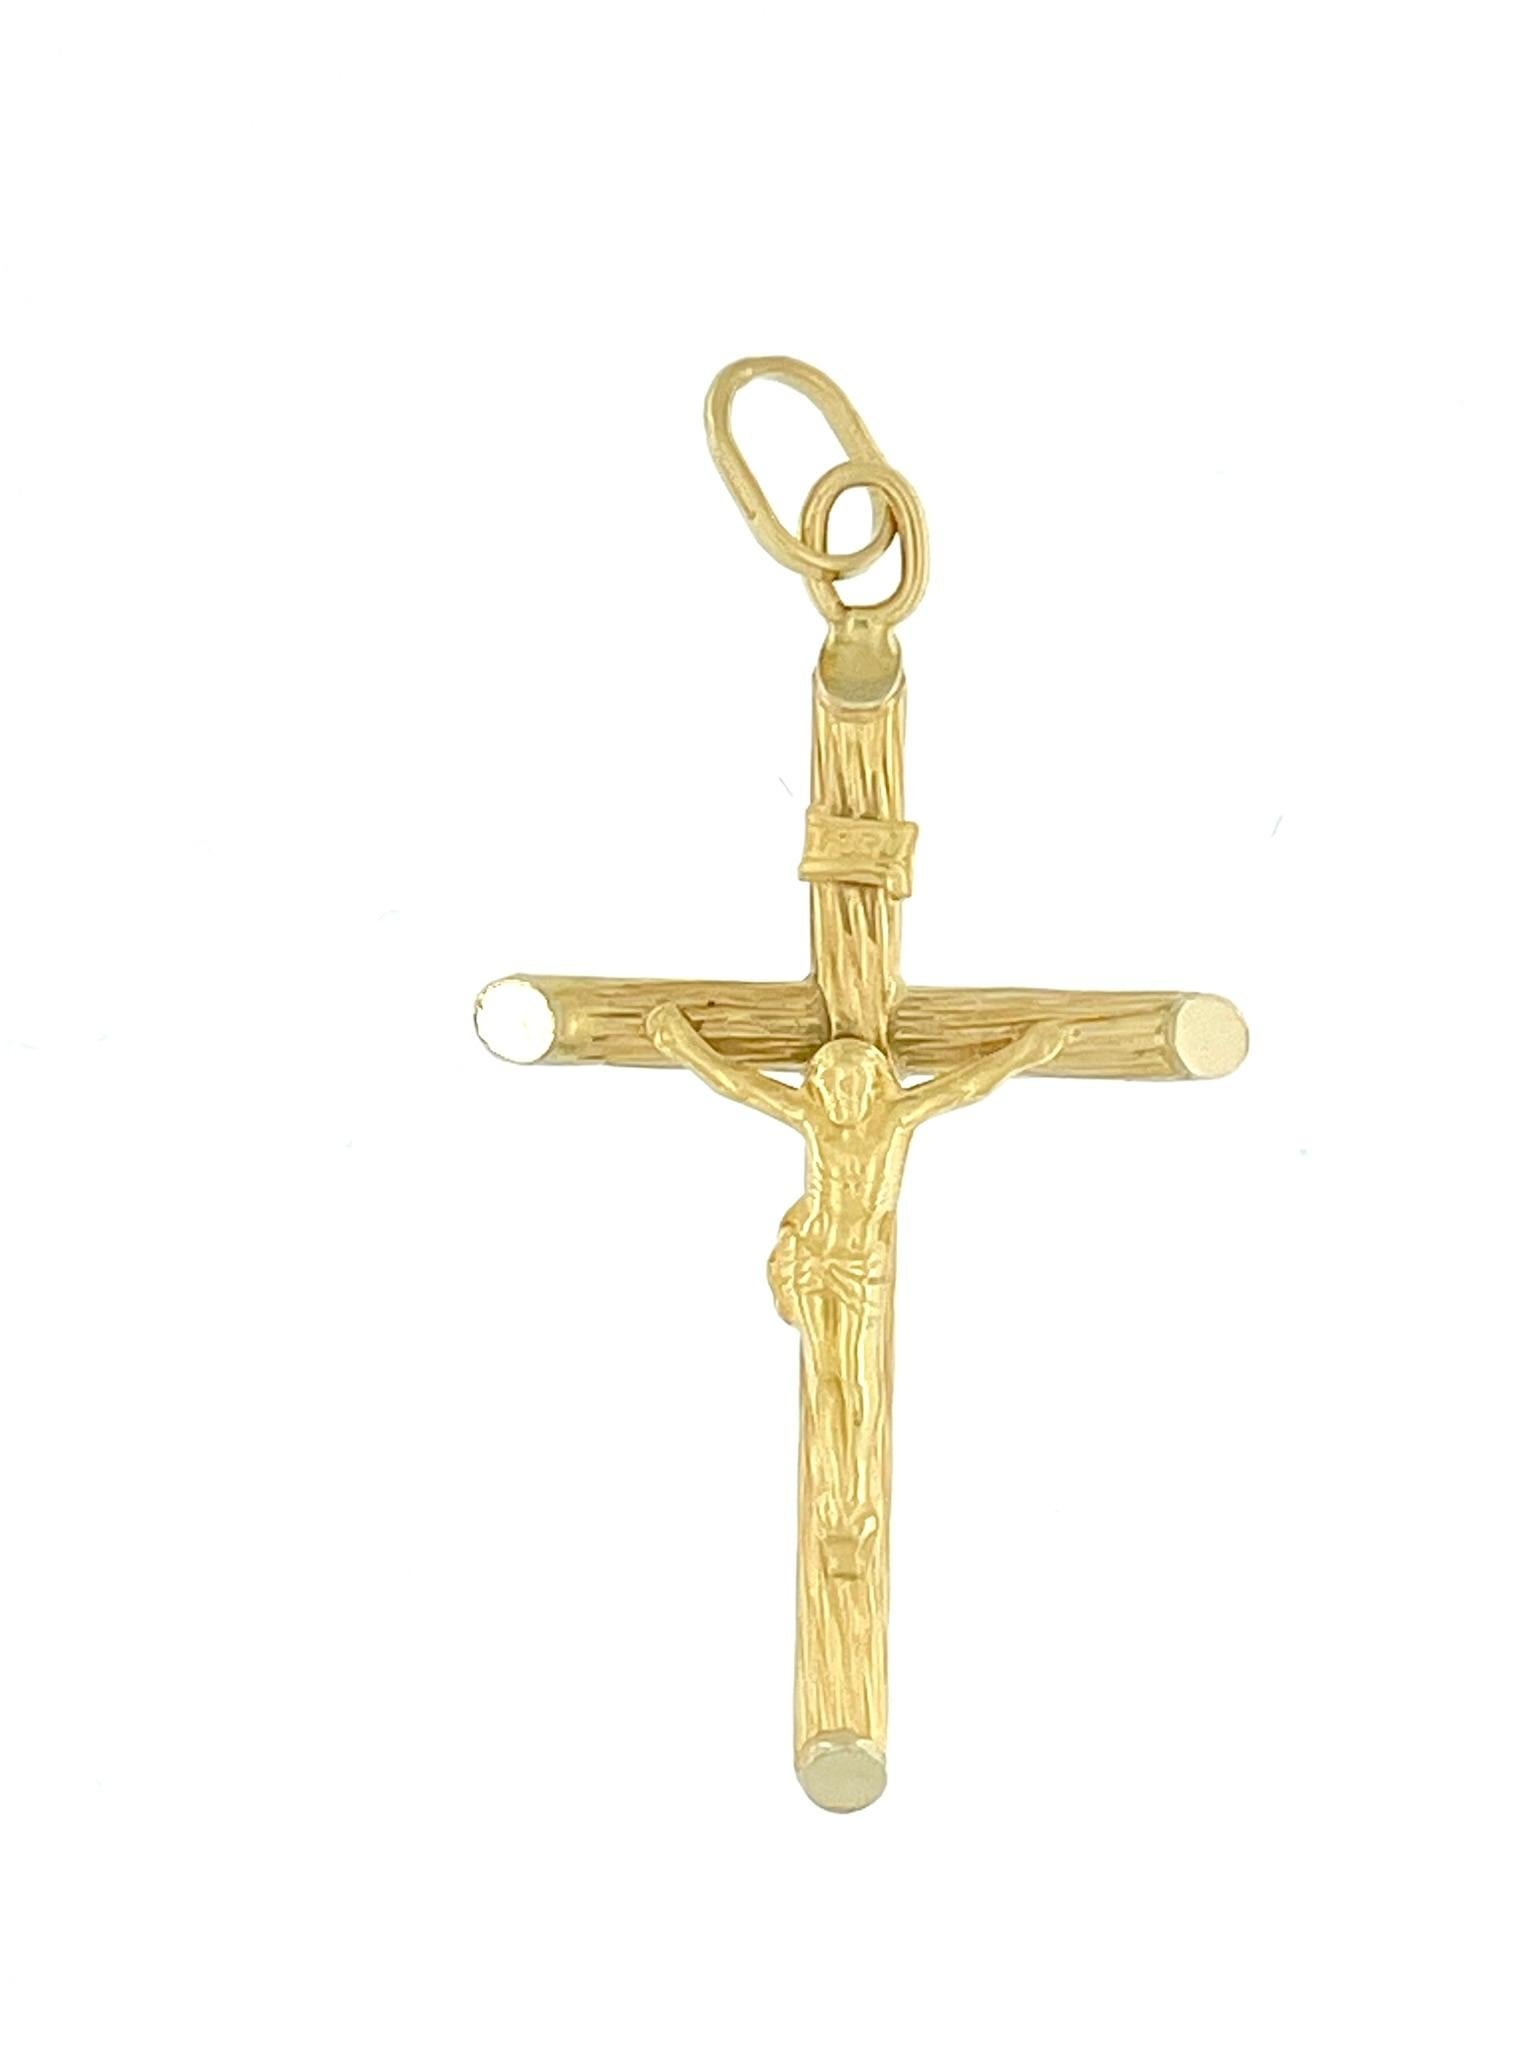 The Italian 18 karat Yellow Gold Classic Crucifix is a timeless and elegant religious pendant crafted with meticulous attention to detail. The crucifix features intricate relief work, showcasing a skillful blend of artistry and craftsmanship. The